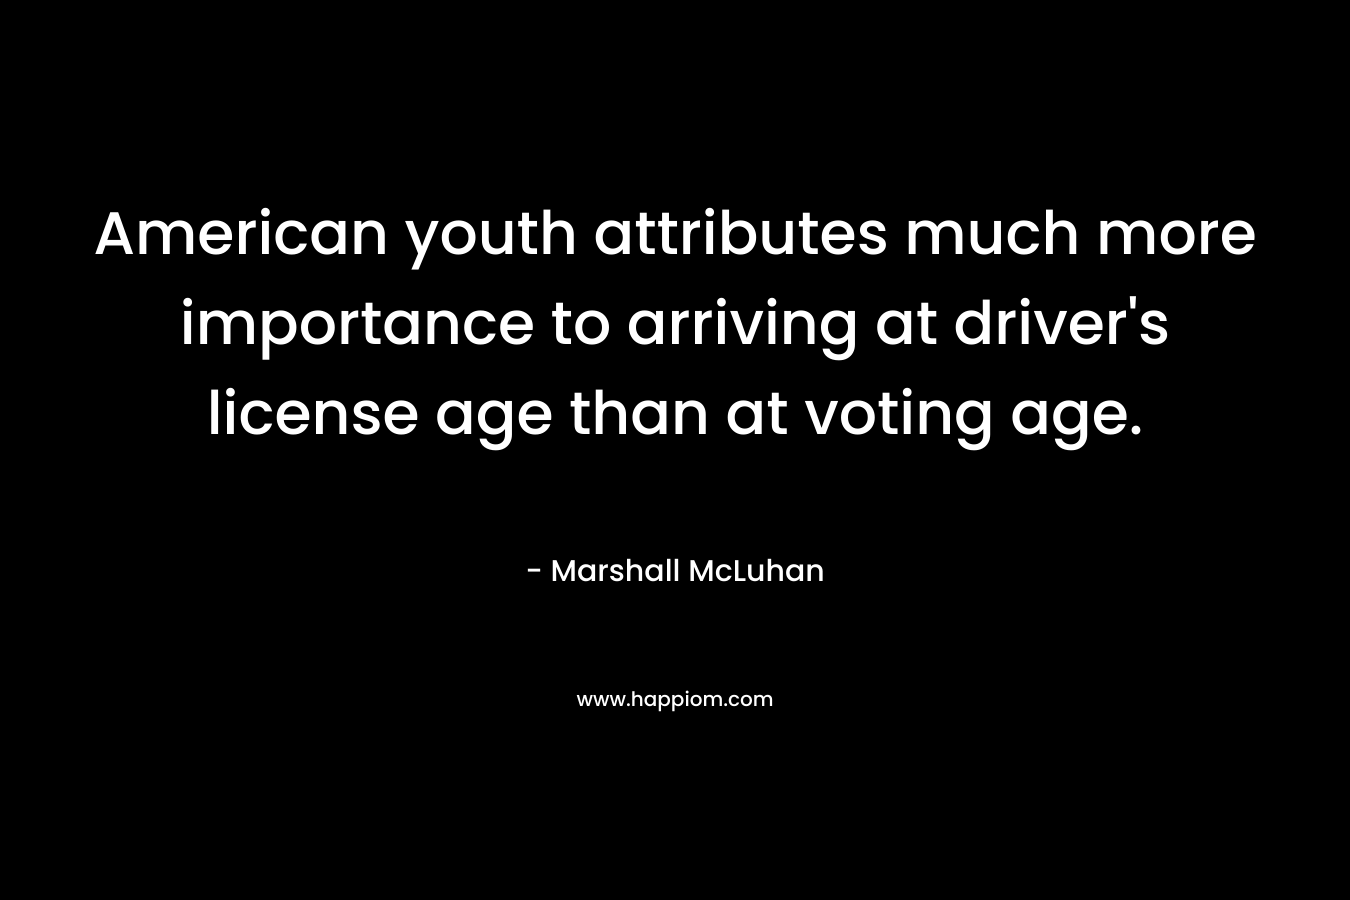 American youth attributes much more importance to arriving at driver's license age than at voting age.